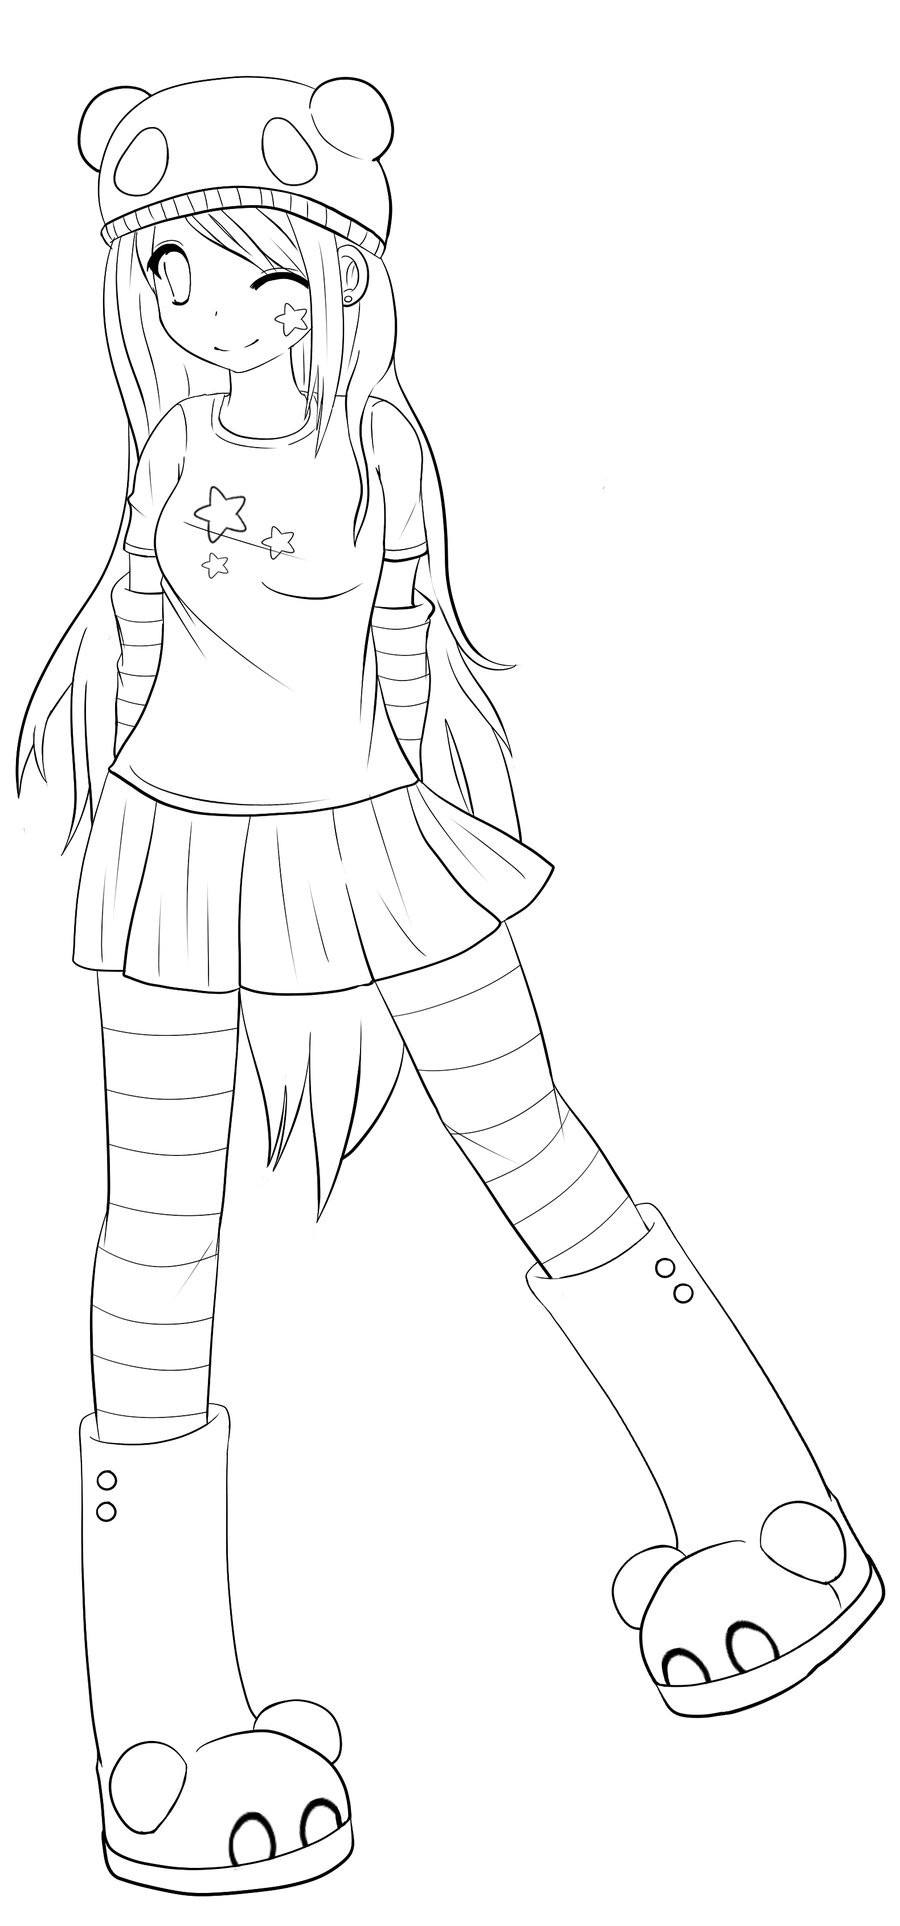 Anime Angel Girl Coloring Pages
 Color Me Panda Girl by Lisey Chu on DeviantArt